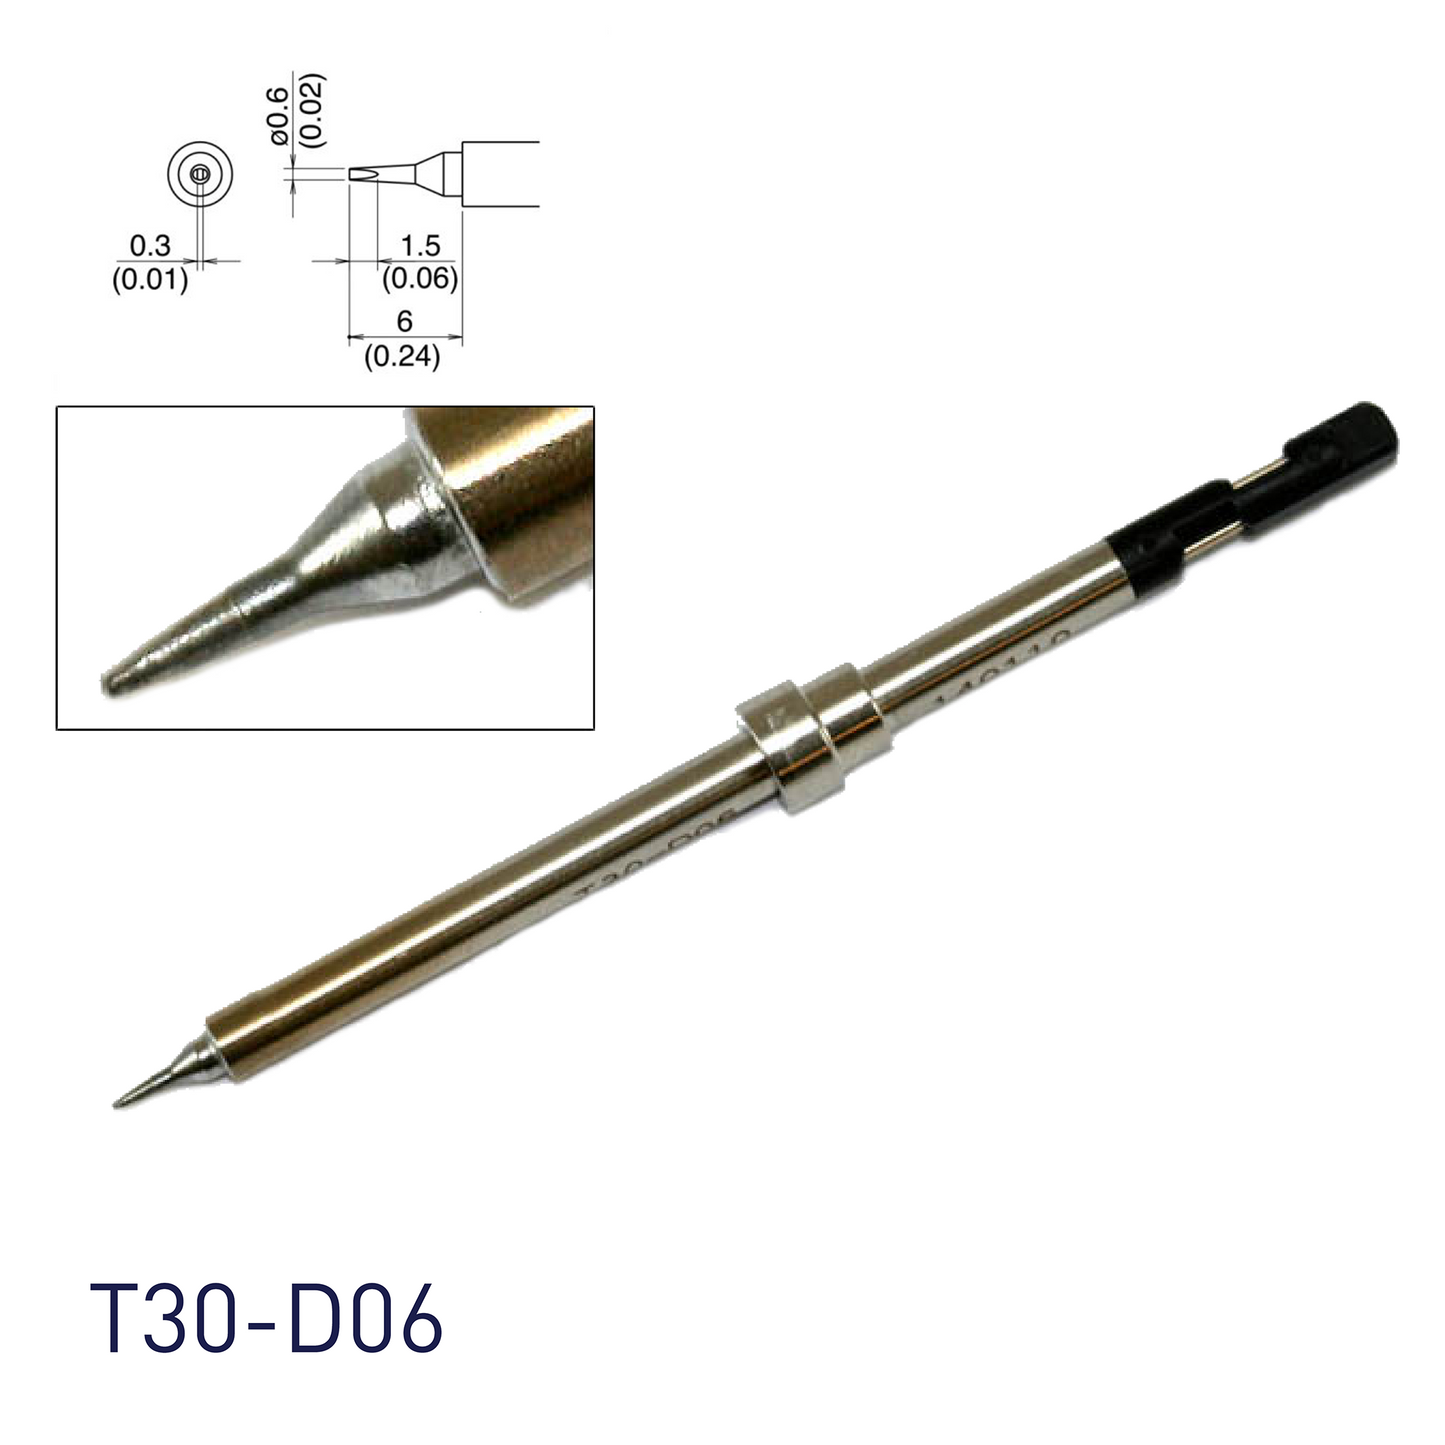 Hakko FM2032 micro soldering iron replacement tips T30-D06 with N2 soldering option available flat-head screwdriver shape